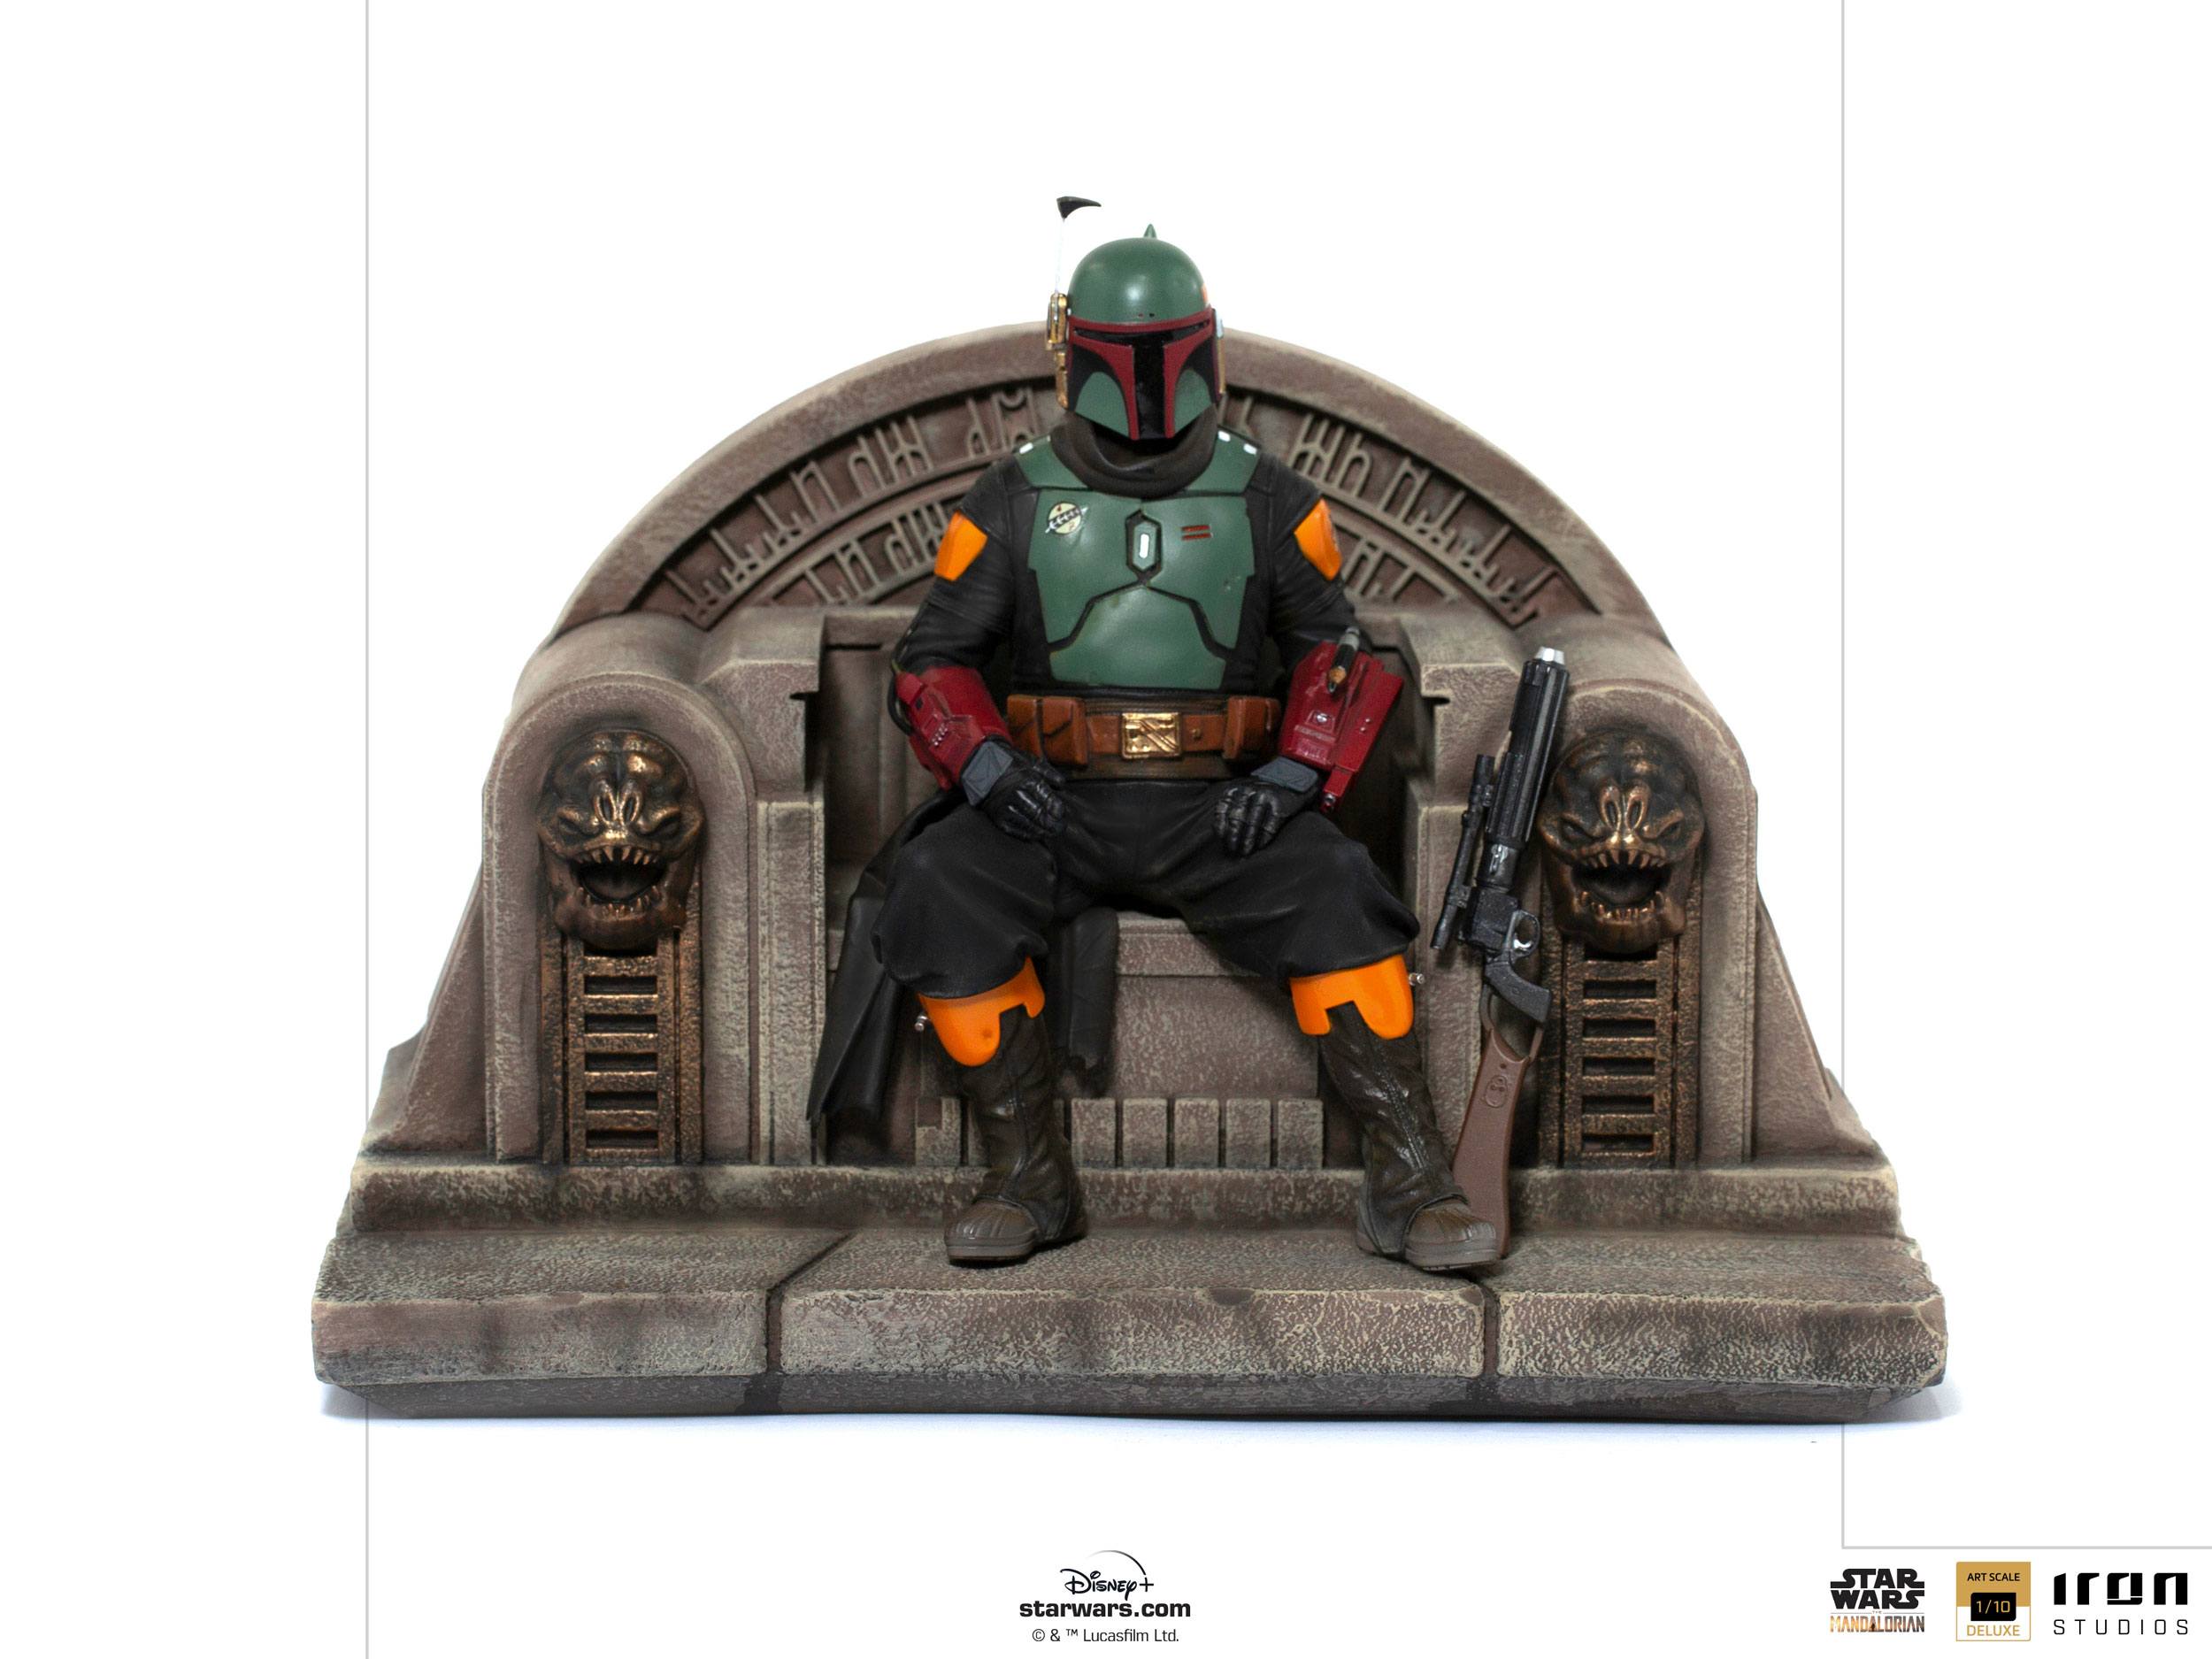 Star Wars The Mandalorian Deluxe Art Scale Statue 1/10 Boba Fett on Throne 18 cm LUCSWR45621-10 609963128099